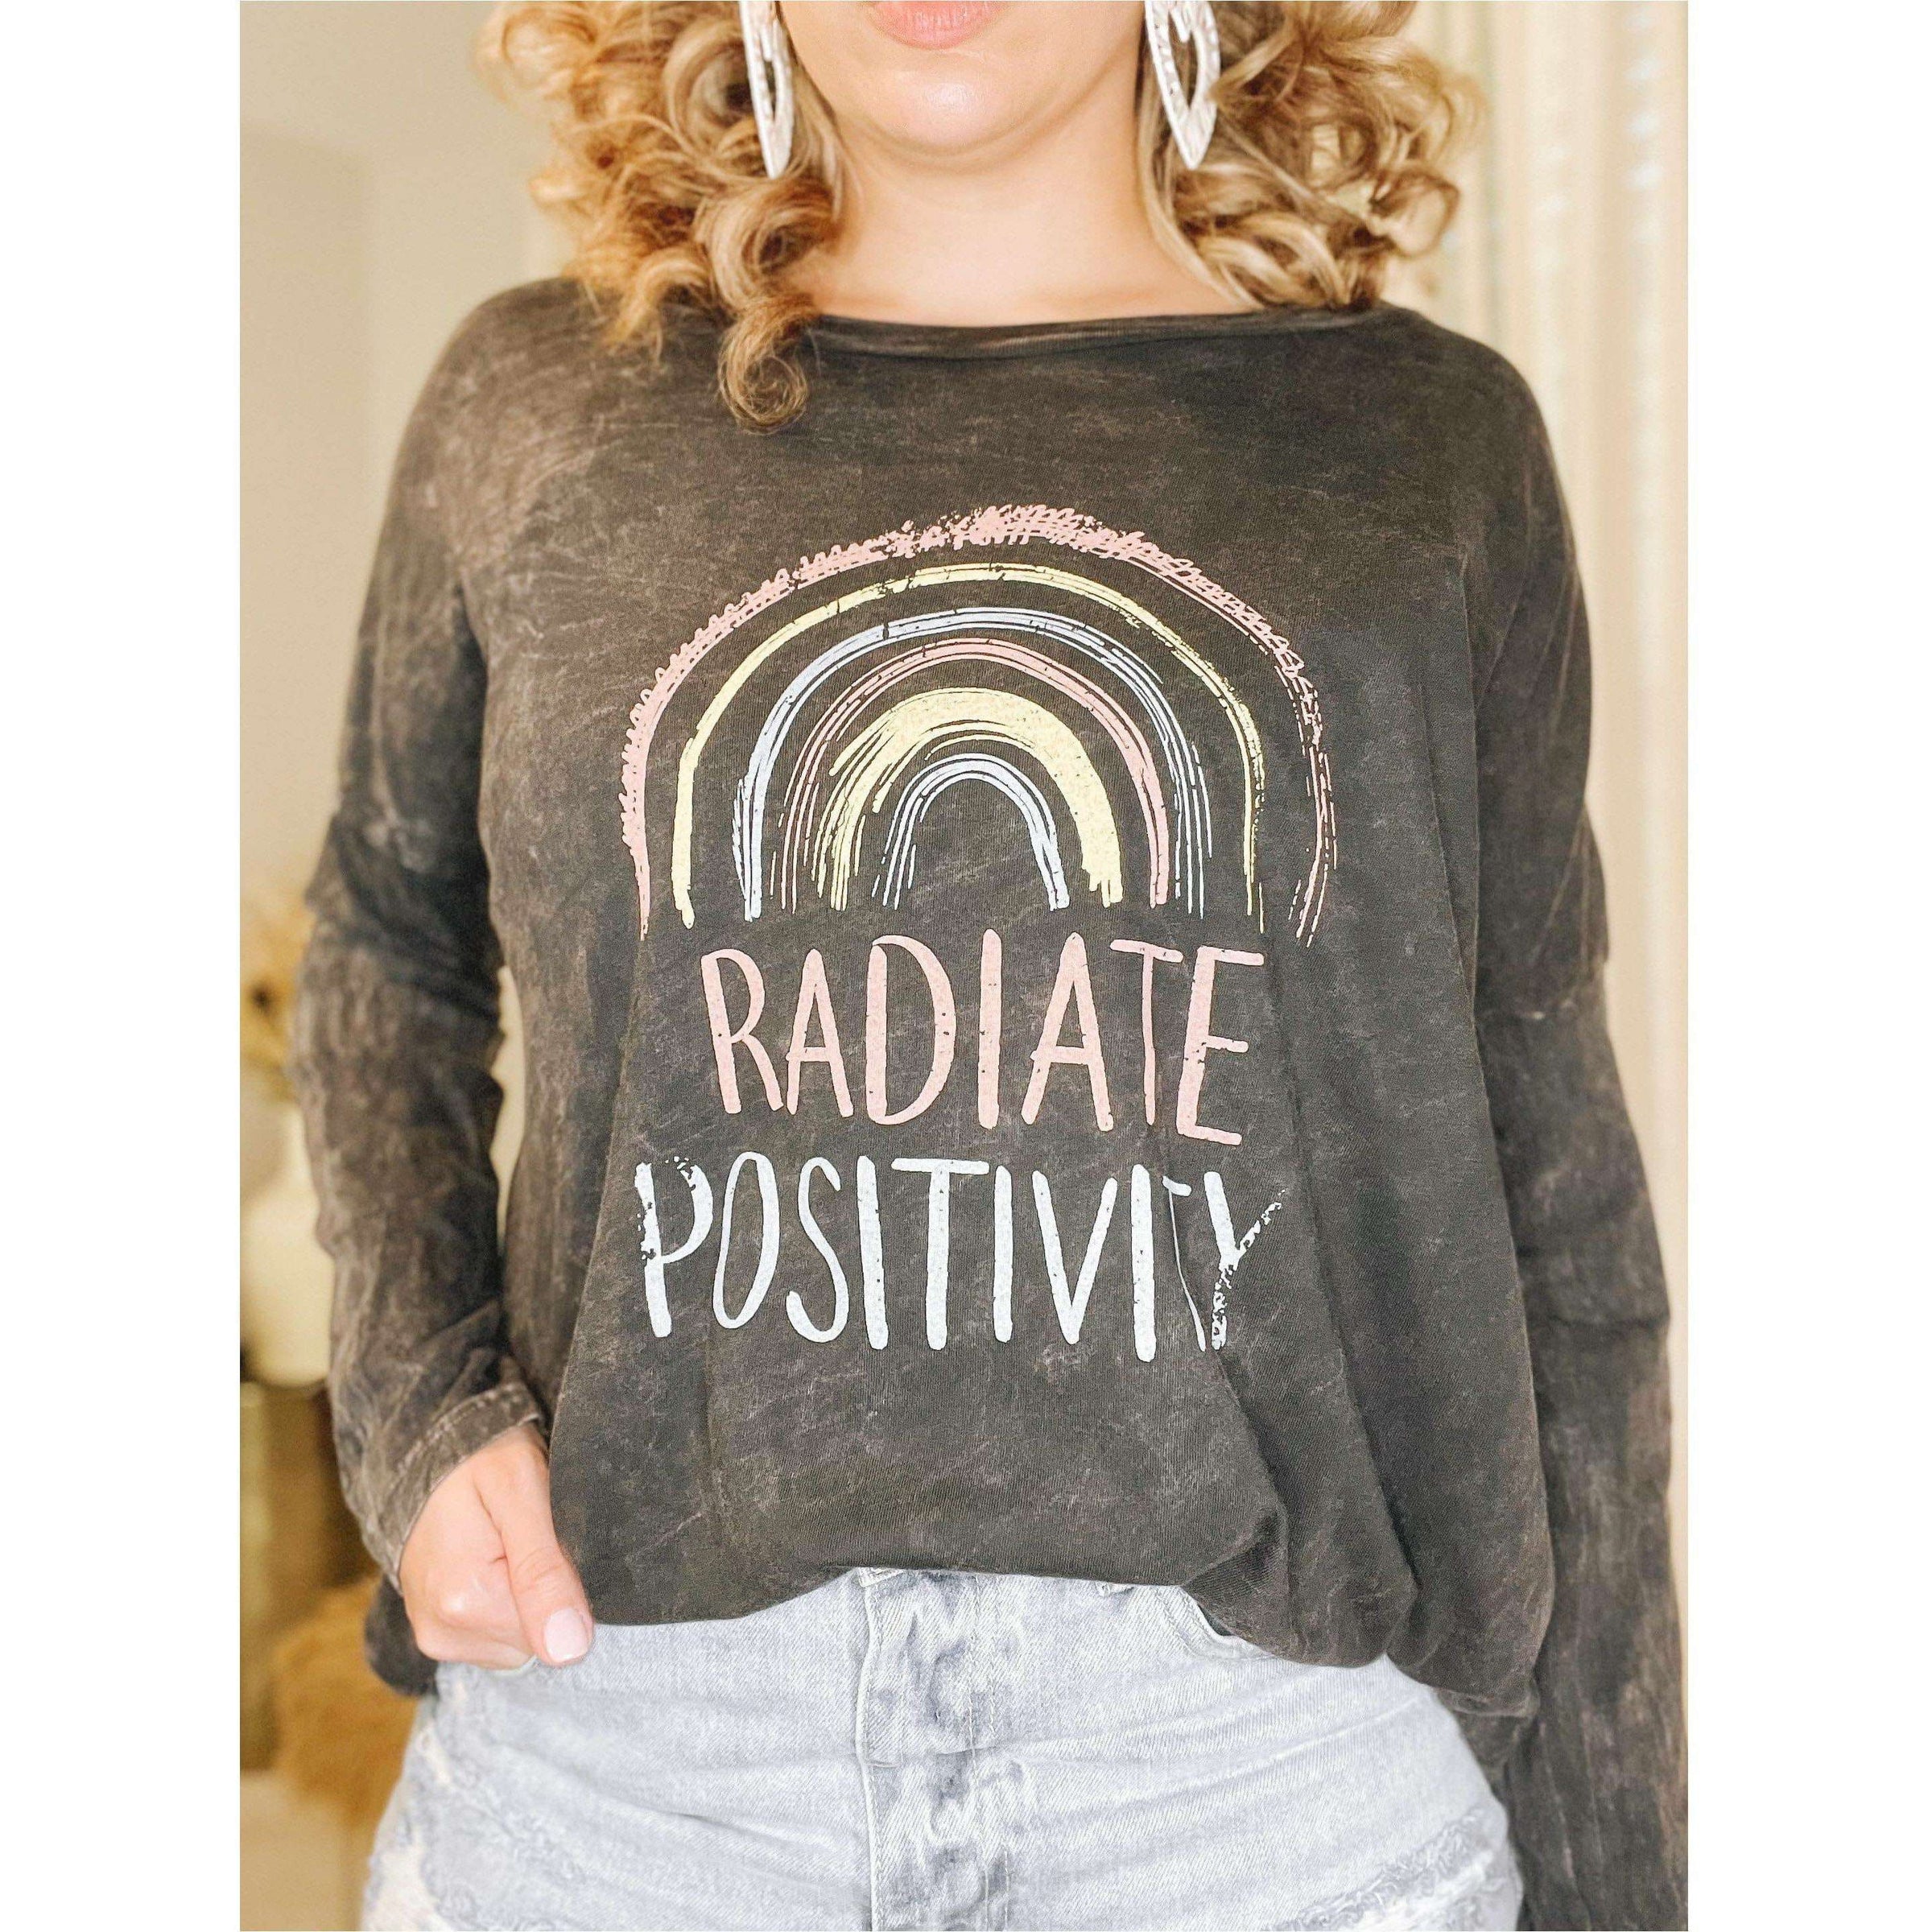 Radiate Positivity Tee - The Hive by Chris Jesselle